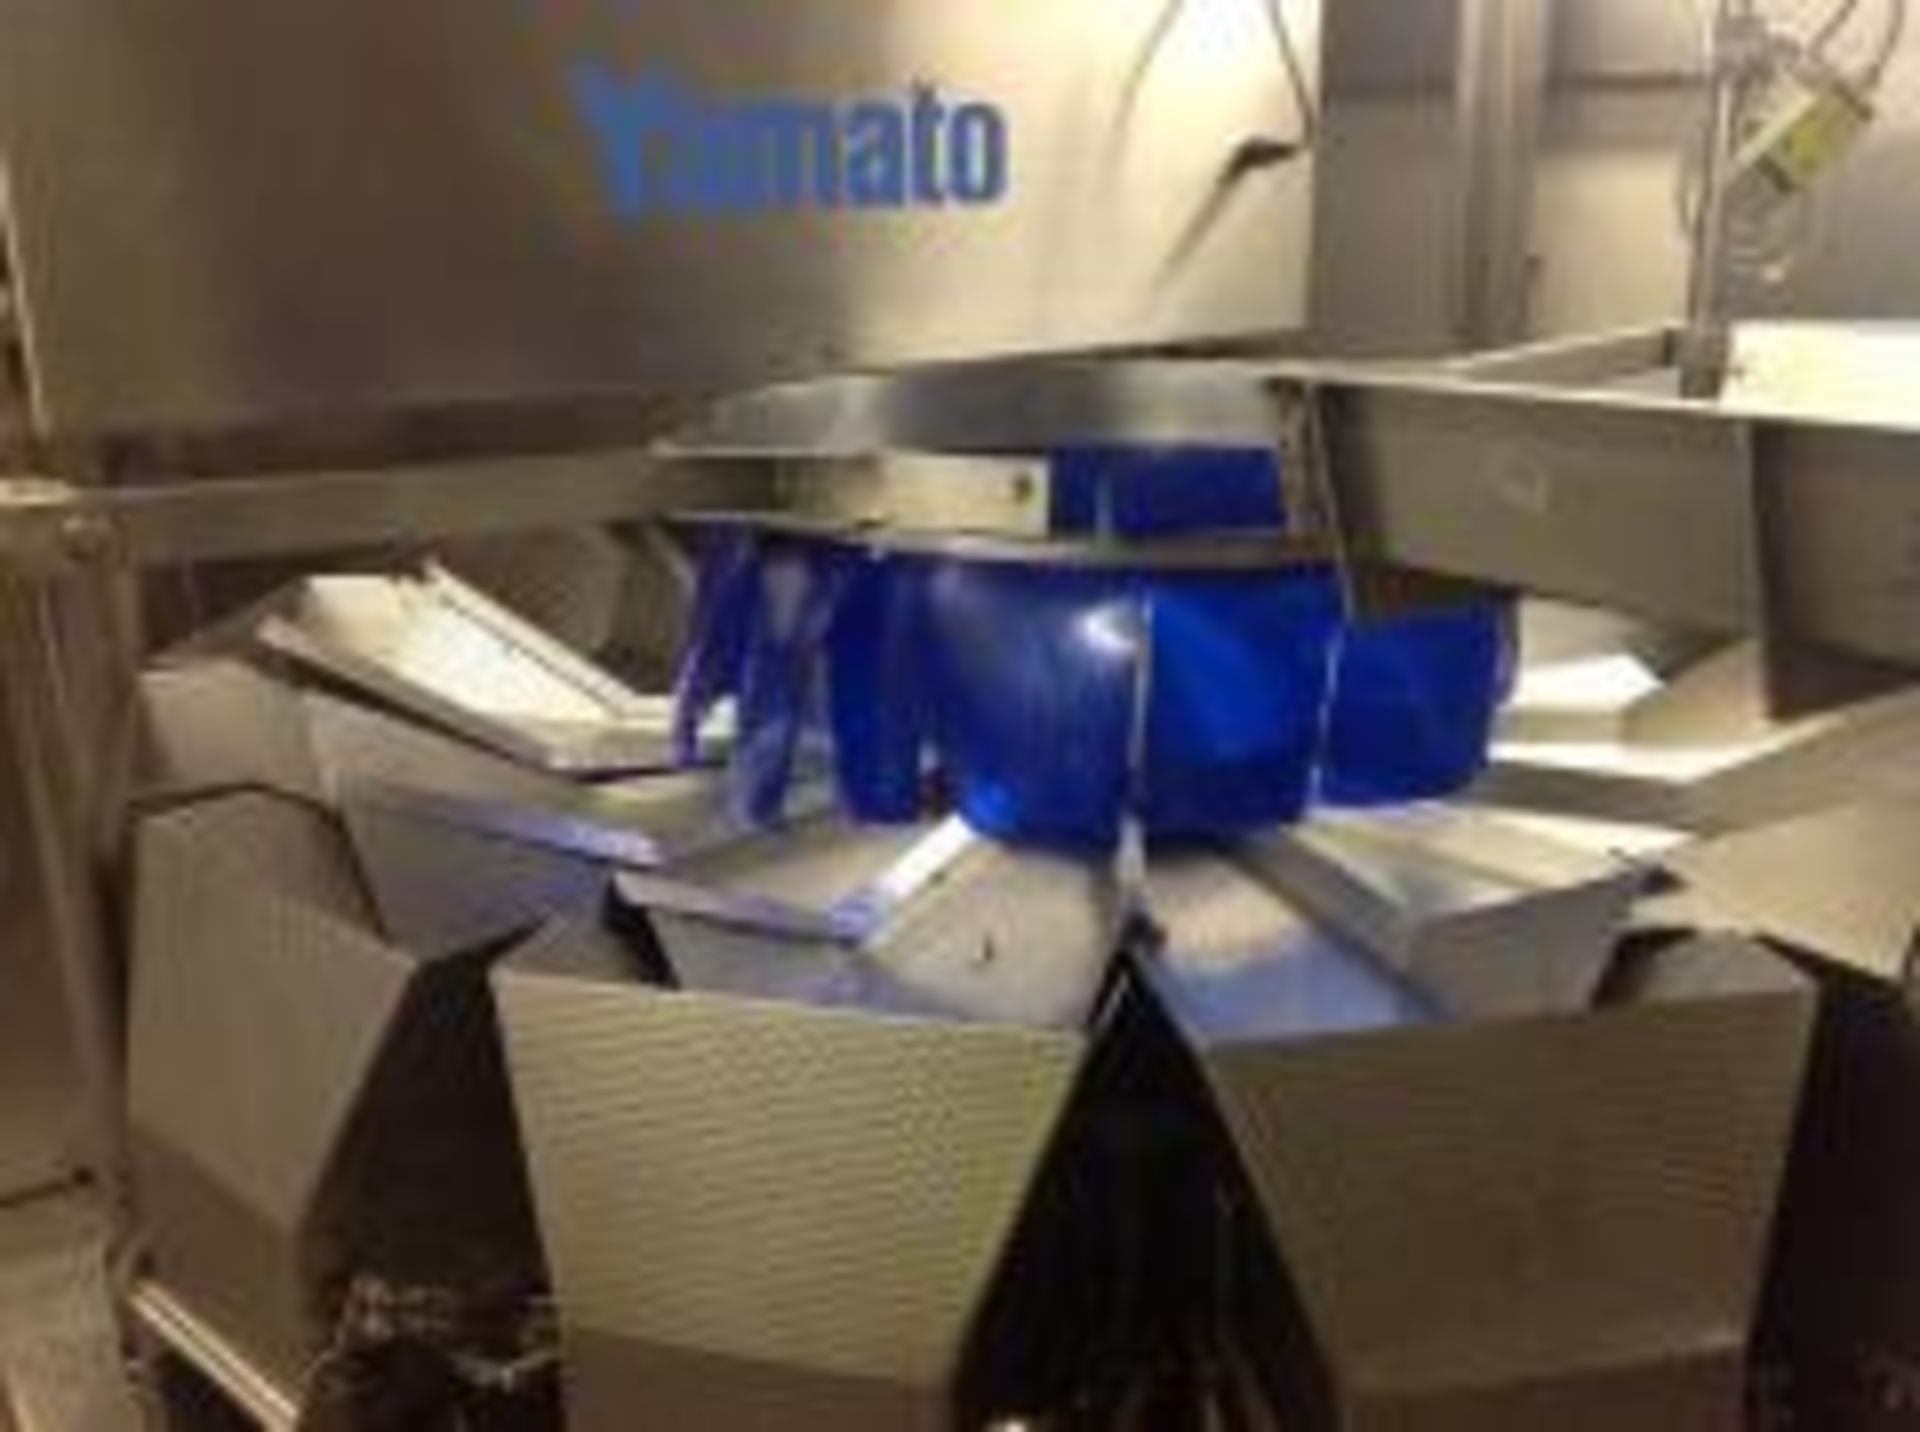 Yamato data weigh model ADW343RWP multi head weigher, weight range 20g - 3000g complete with - Image 2 of 7